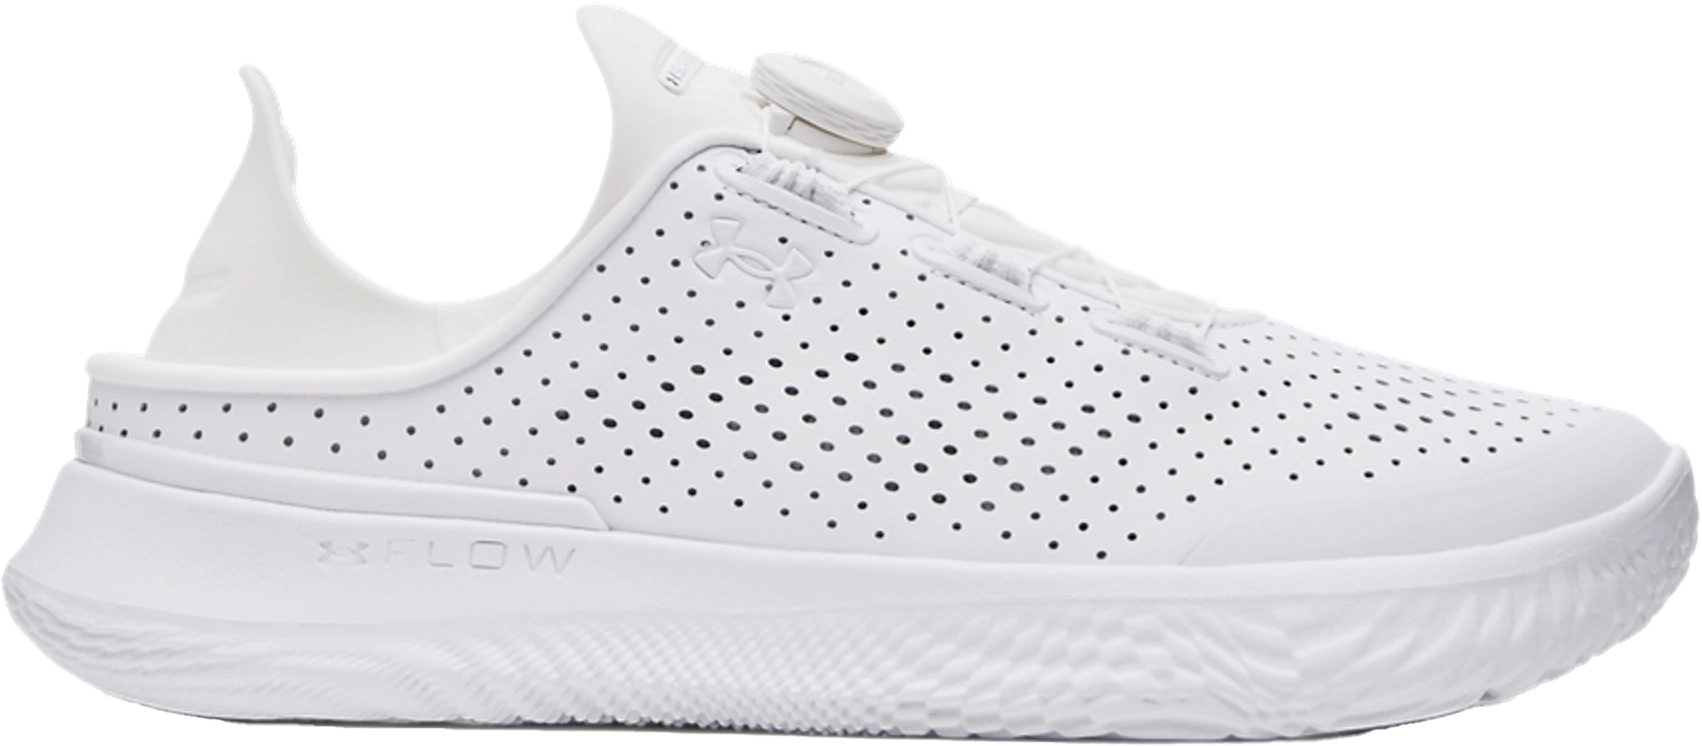 Chaussures de fitness Under Armour UA Slipspeed Trainer SYN-WHT